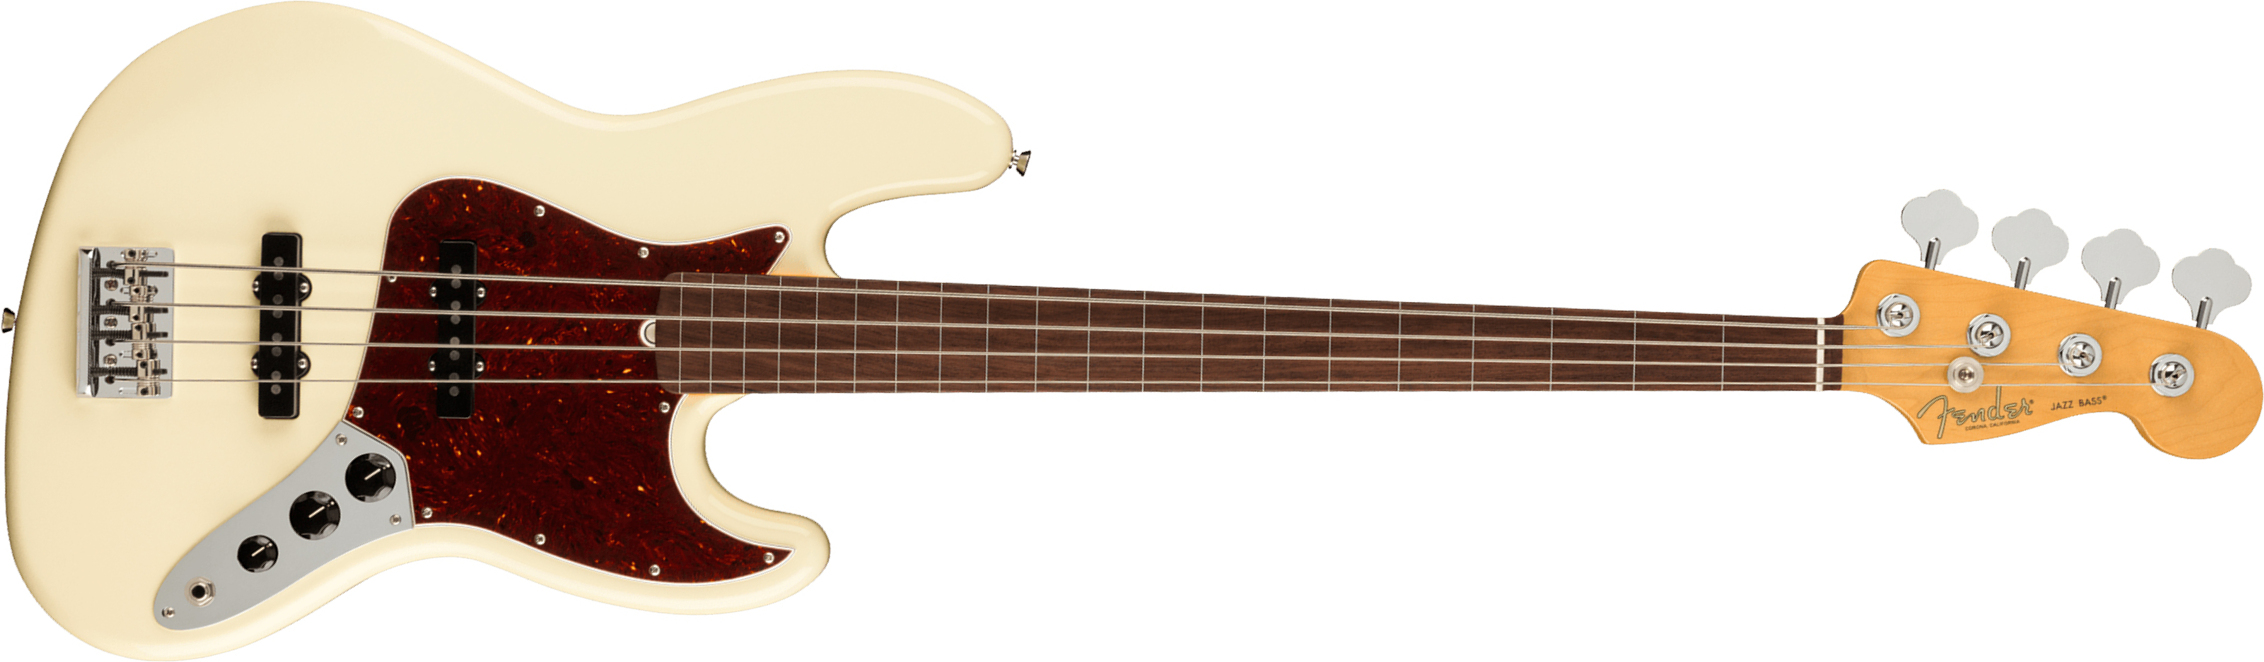 Fender Jazz Bass Fretless American Professional Ii Usa Rw - Olympic White - Solid body electric bass - Main picture